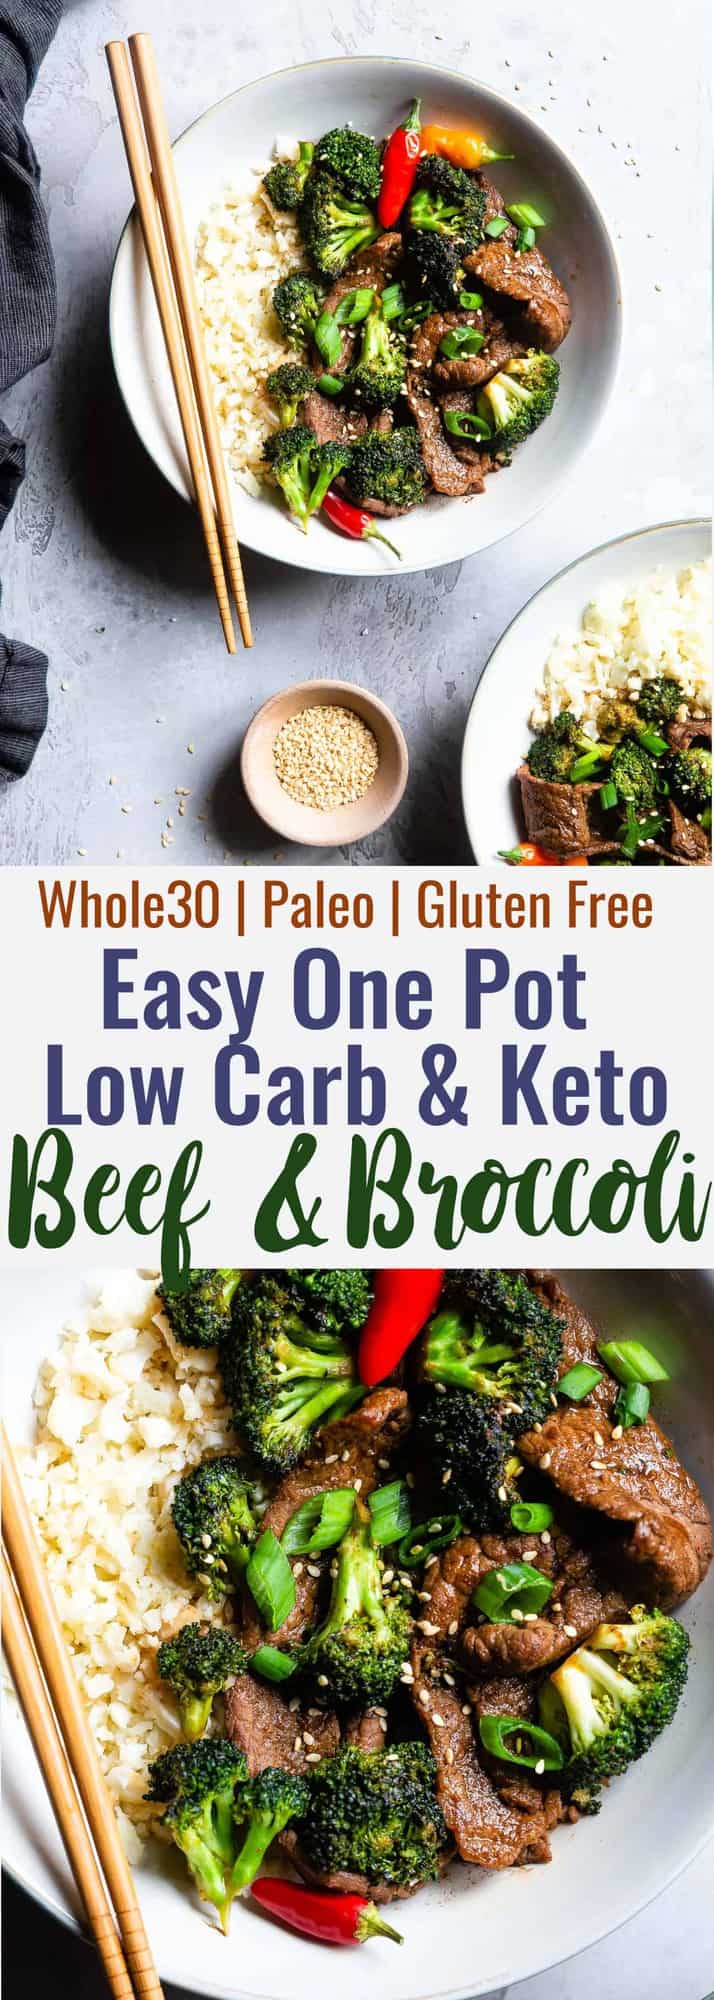 Paleo low carb keto beef and broccoli